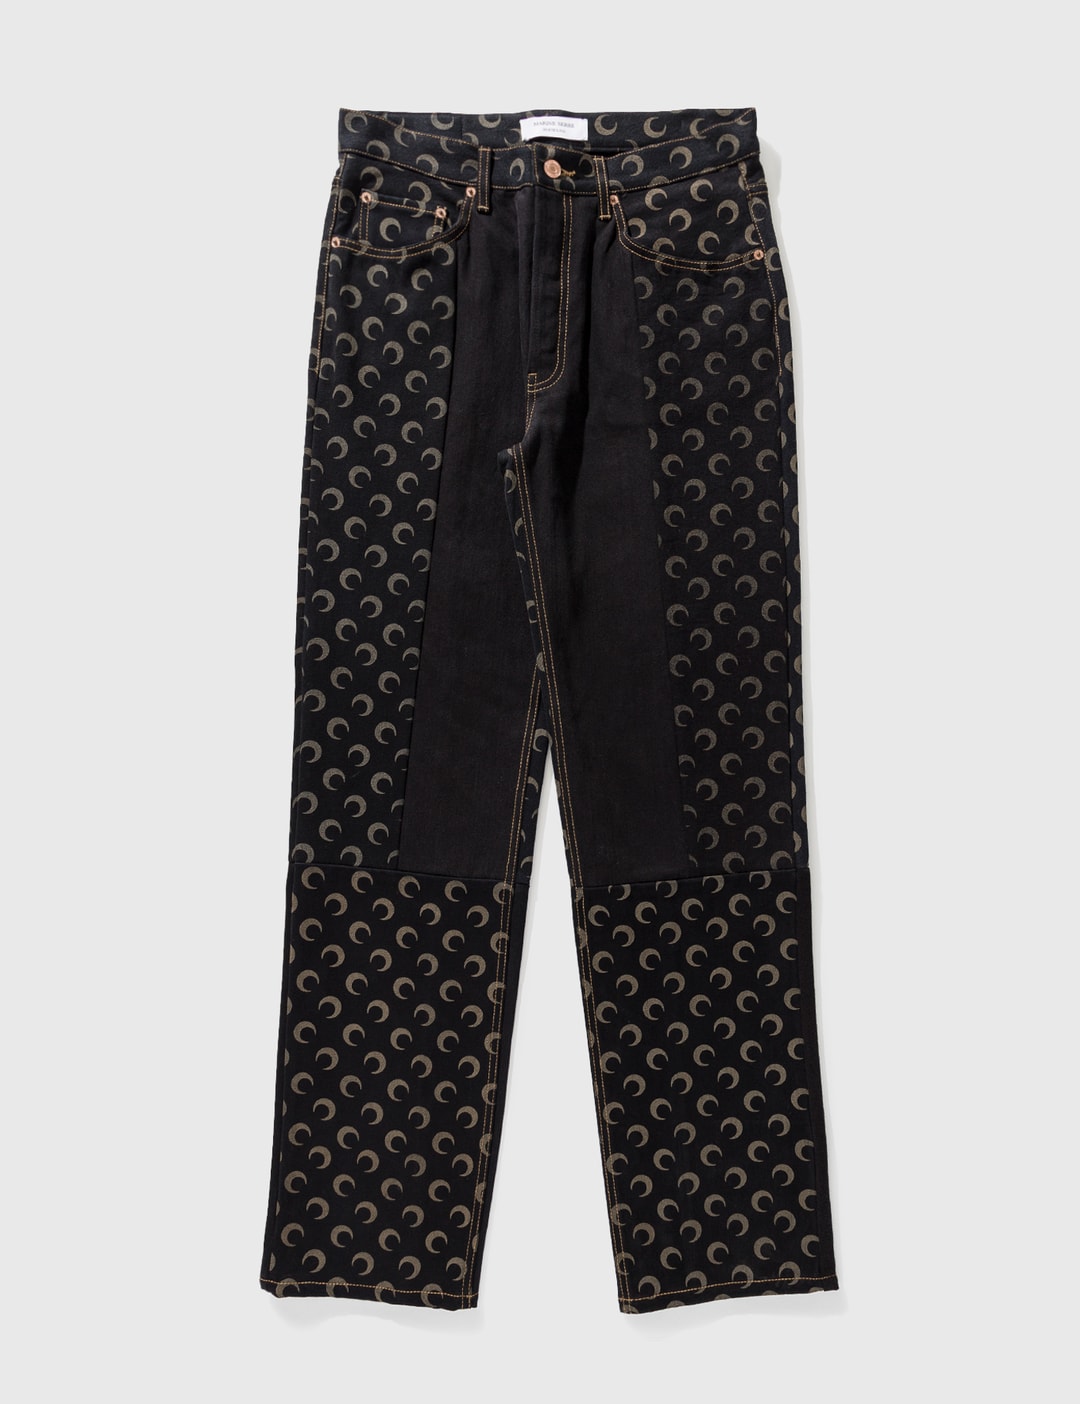 Moon Denim Trousers Placeholder Image